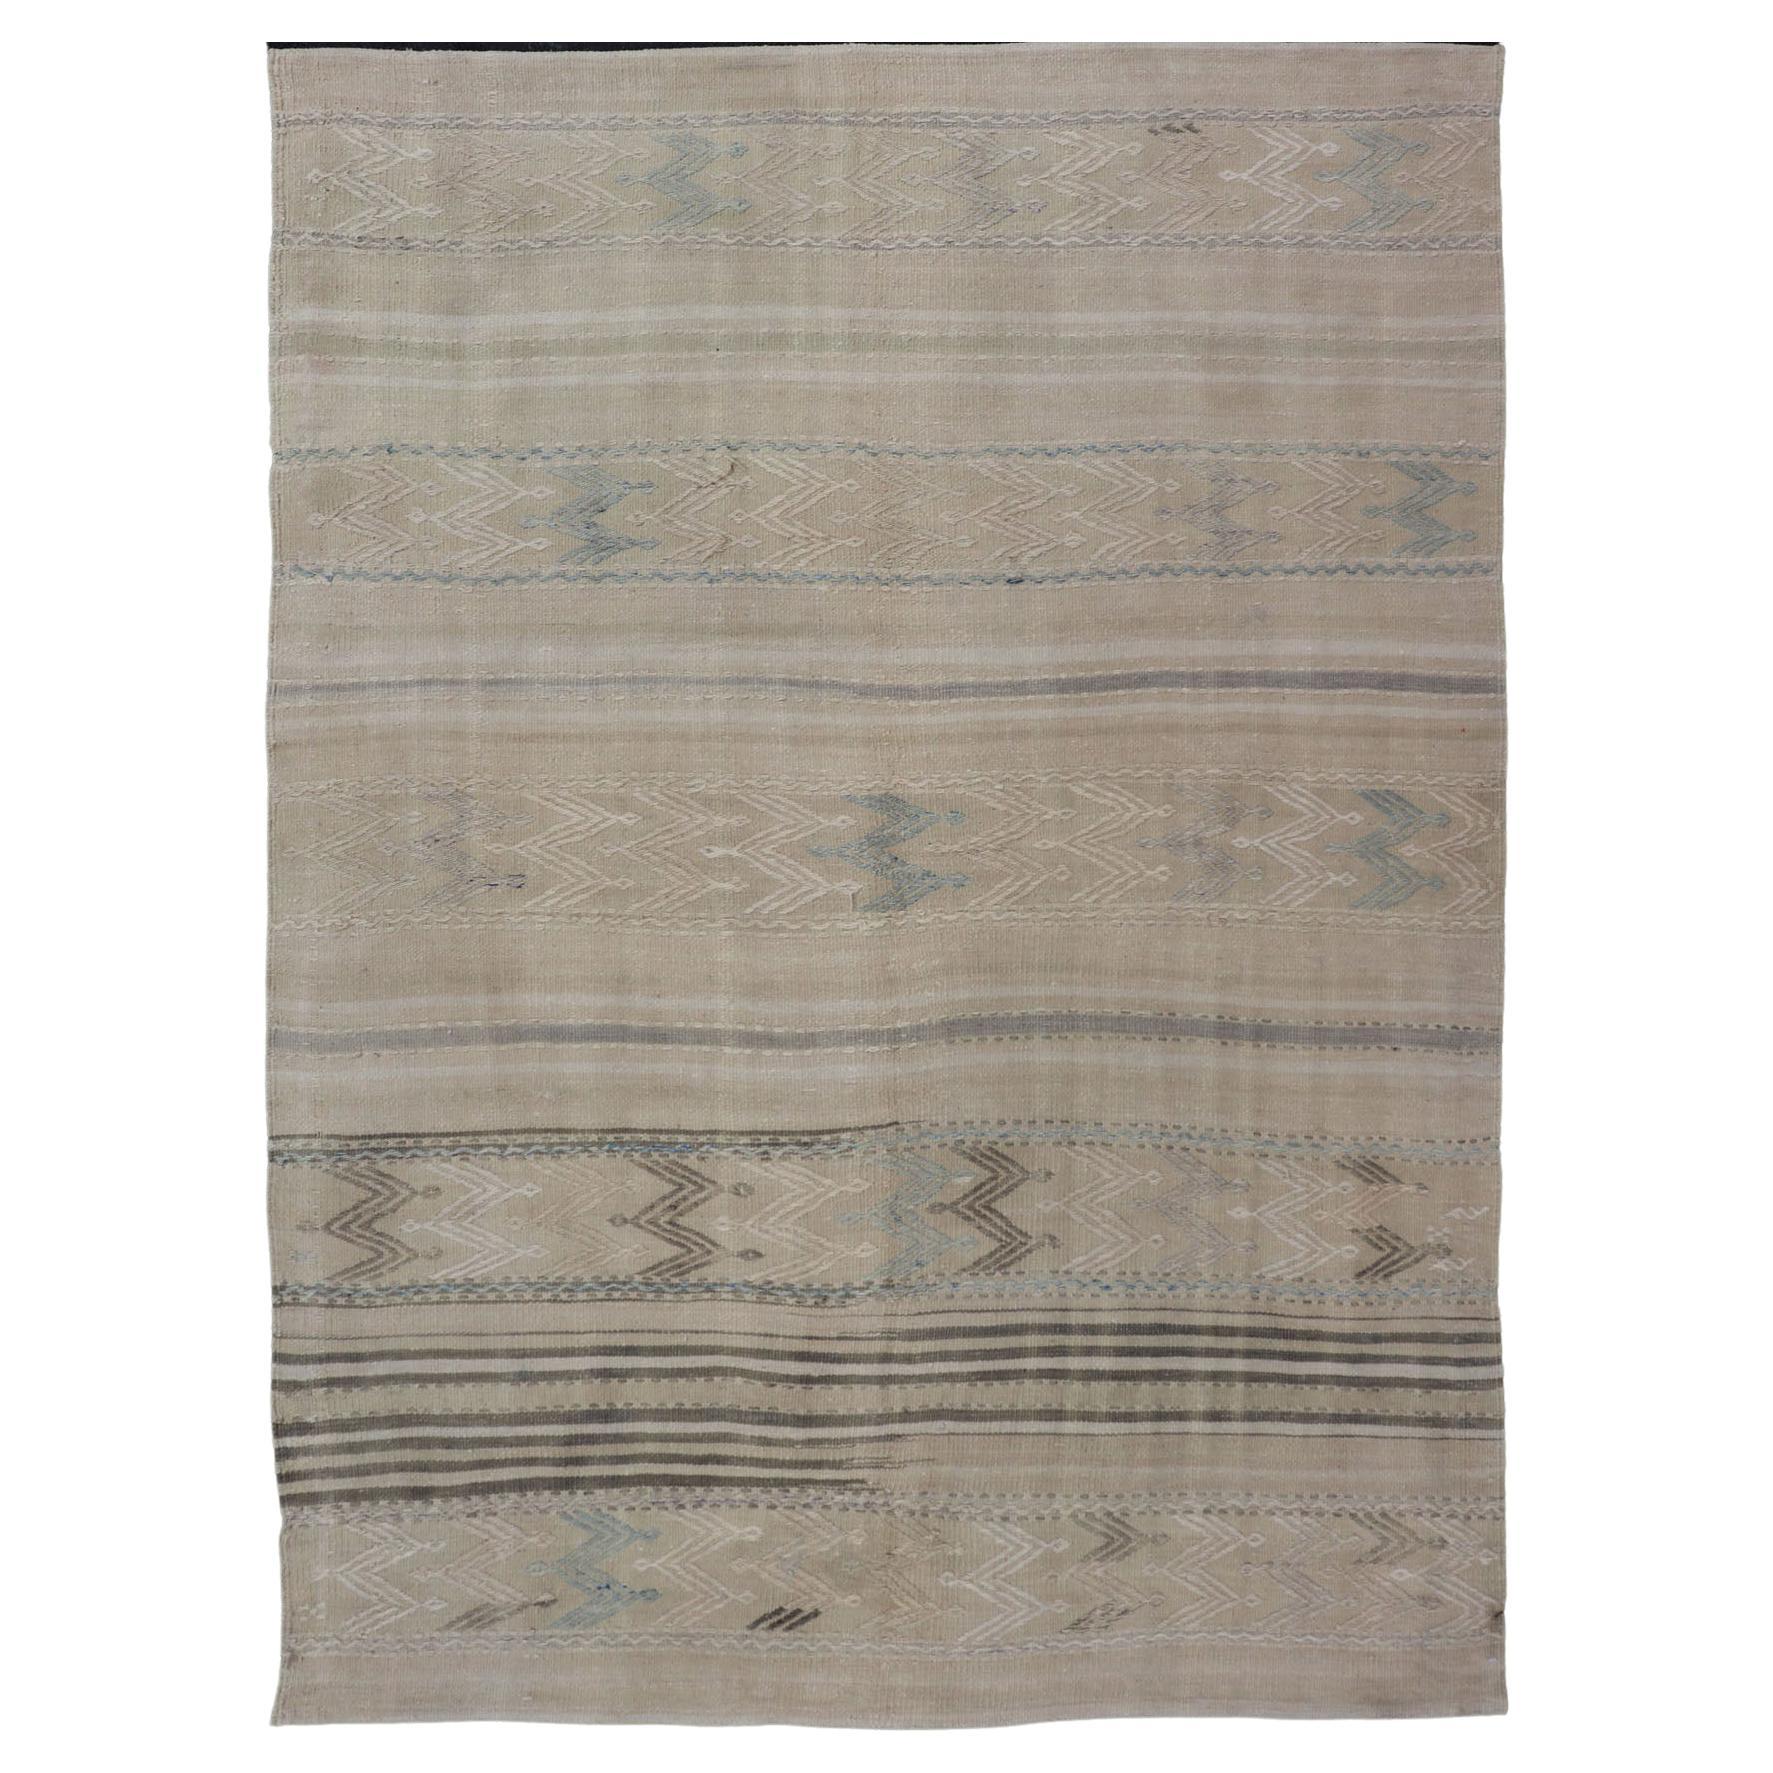 Turkish Flat-Weave Kilim with Tribal Embroideries in Taupe, Tan, Blue-Gray Color For Sale